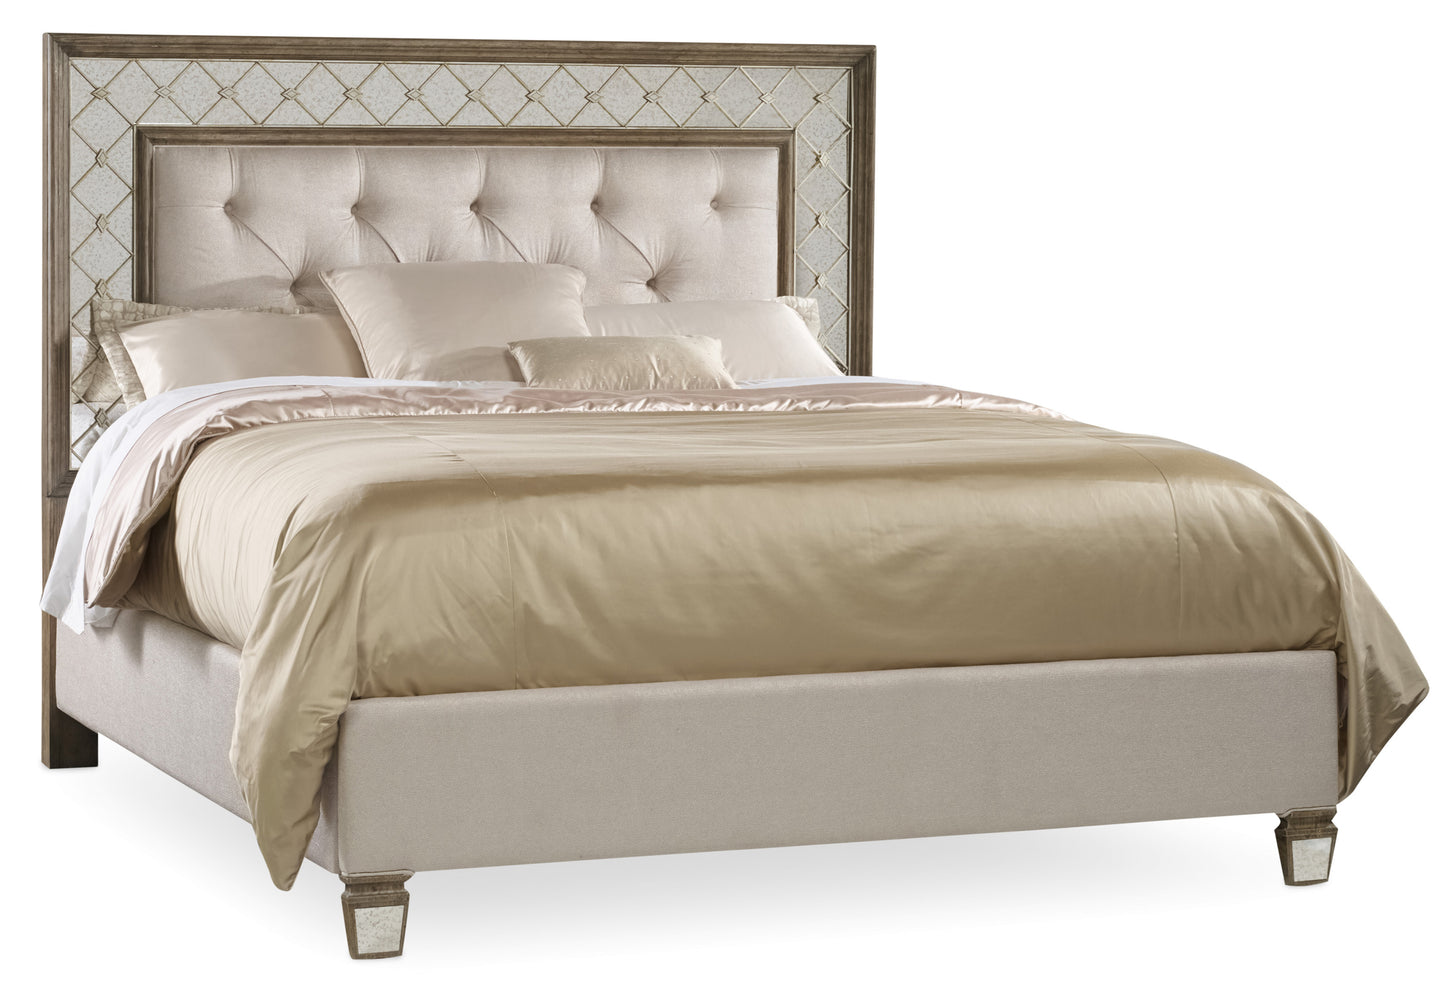 Sanctuary California King Mirrored Upholstered Bed